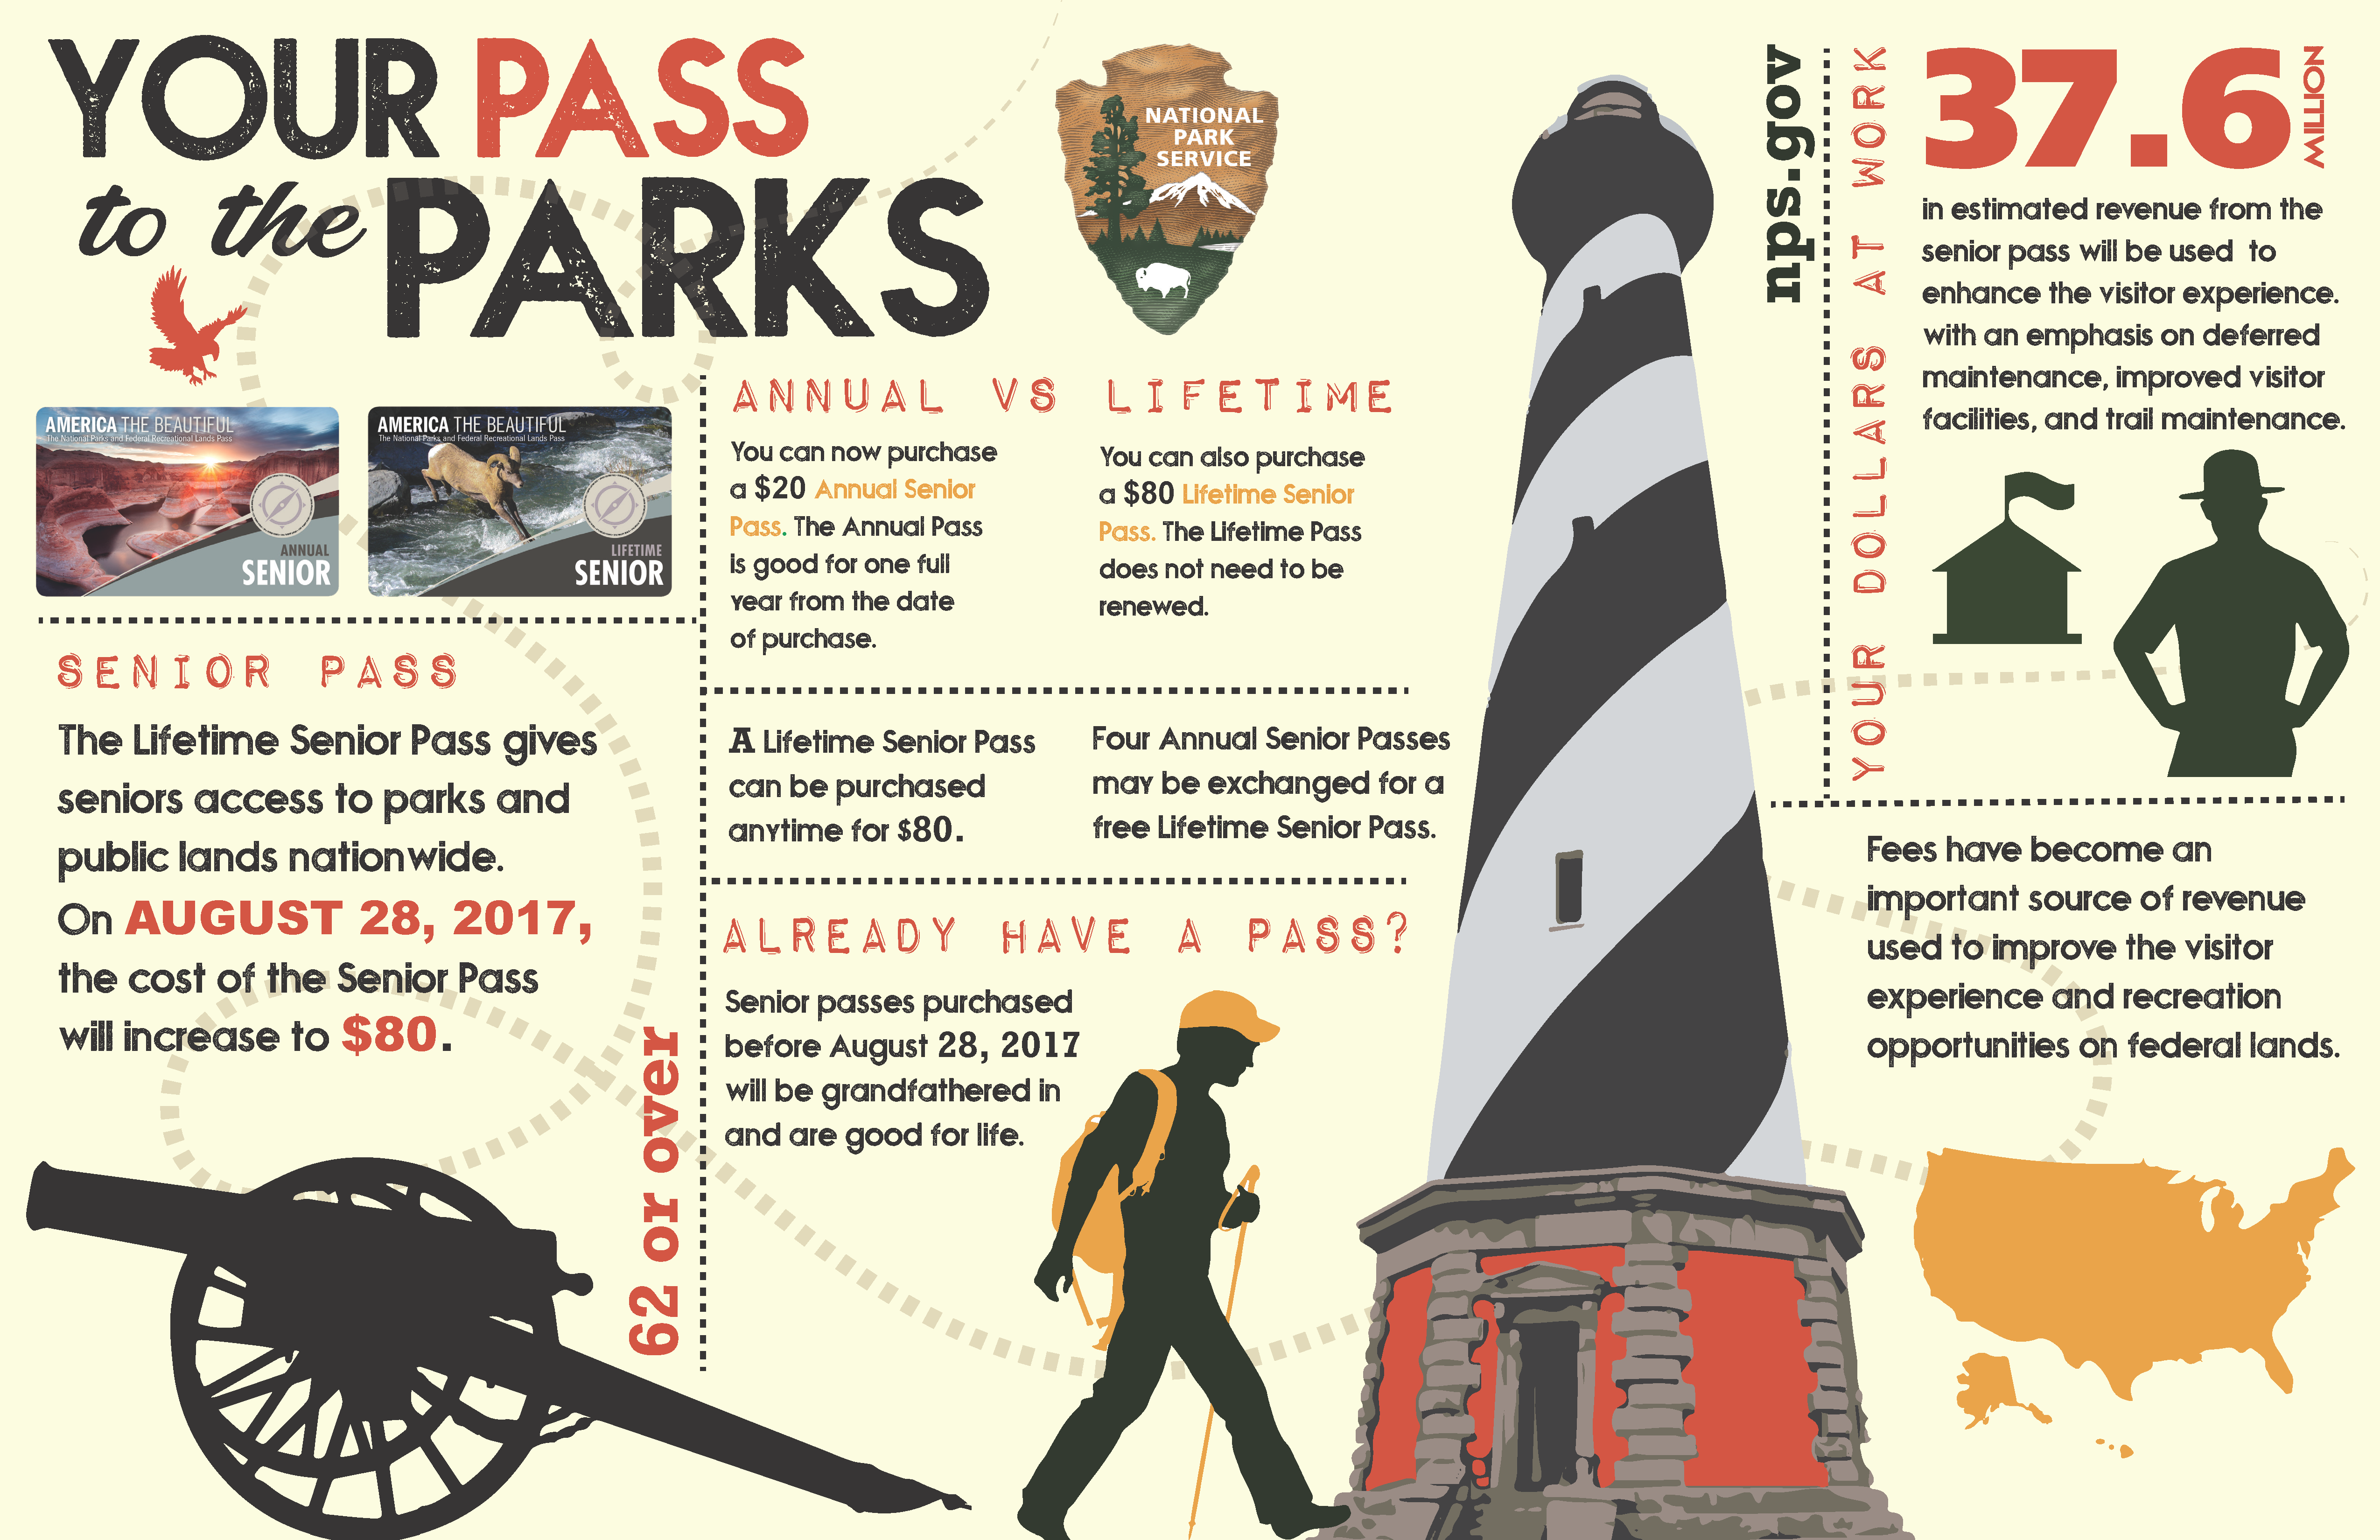 https://www.nps.gov/planyourvisit/upload/senior-pass-infographic-5100w.png